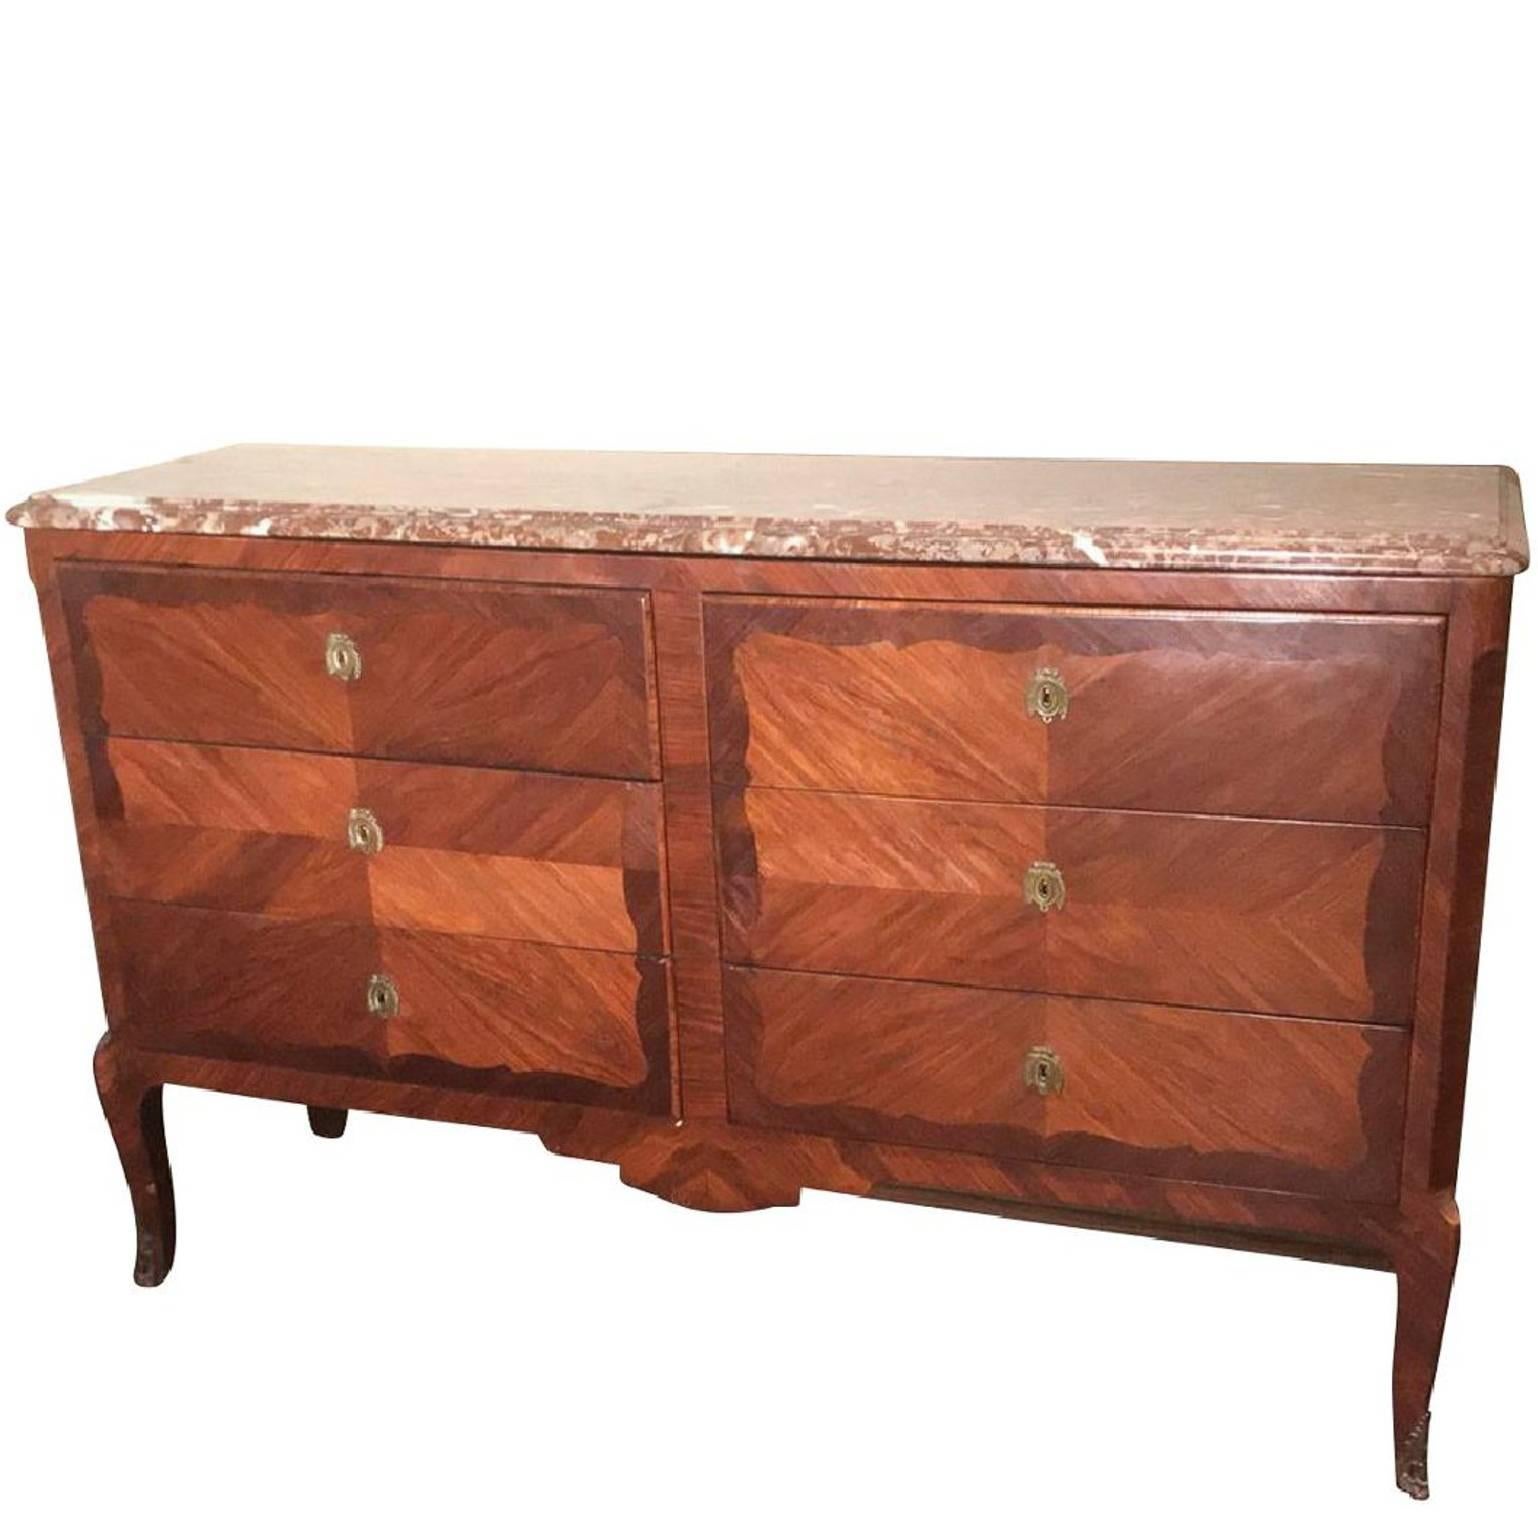 19th Century French Kingswood Commode